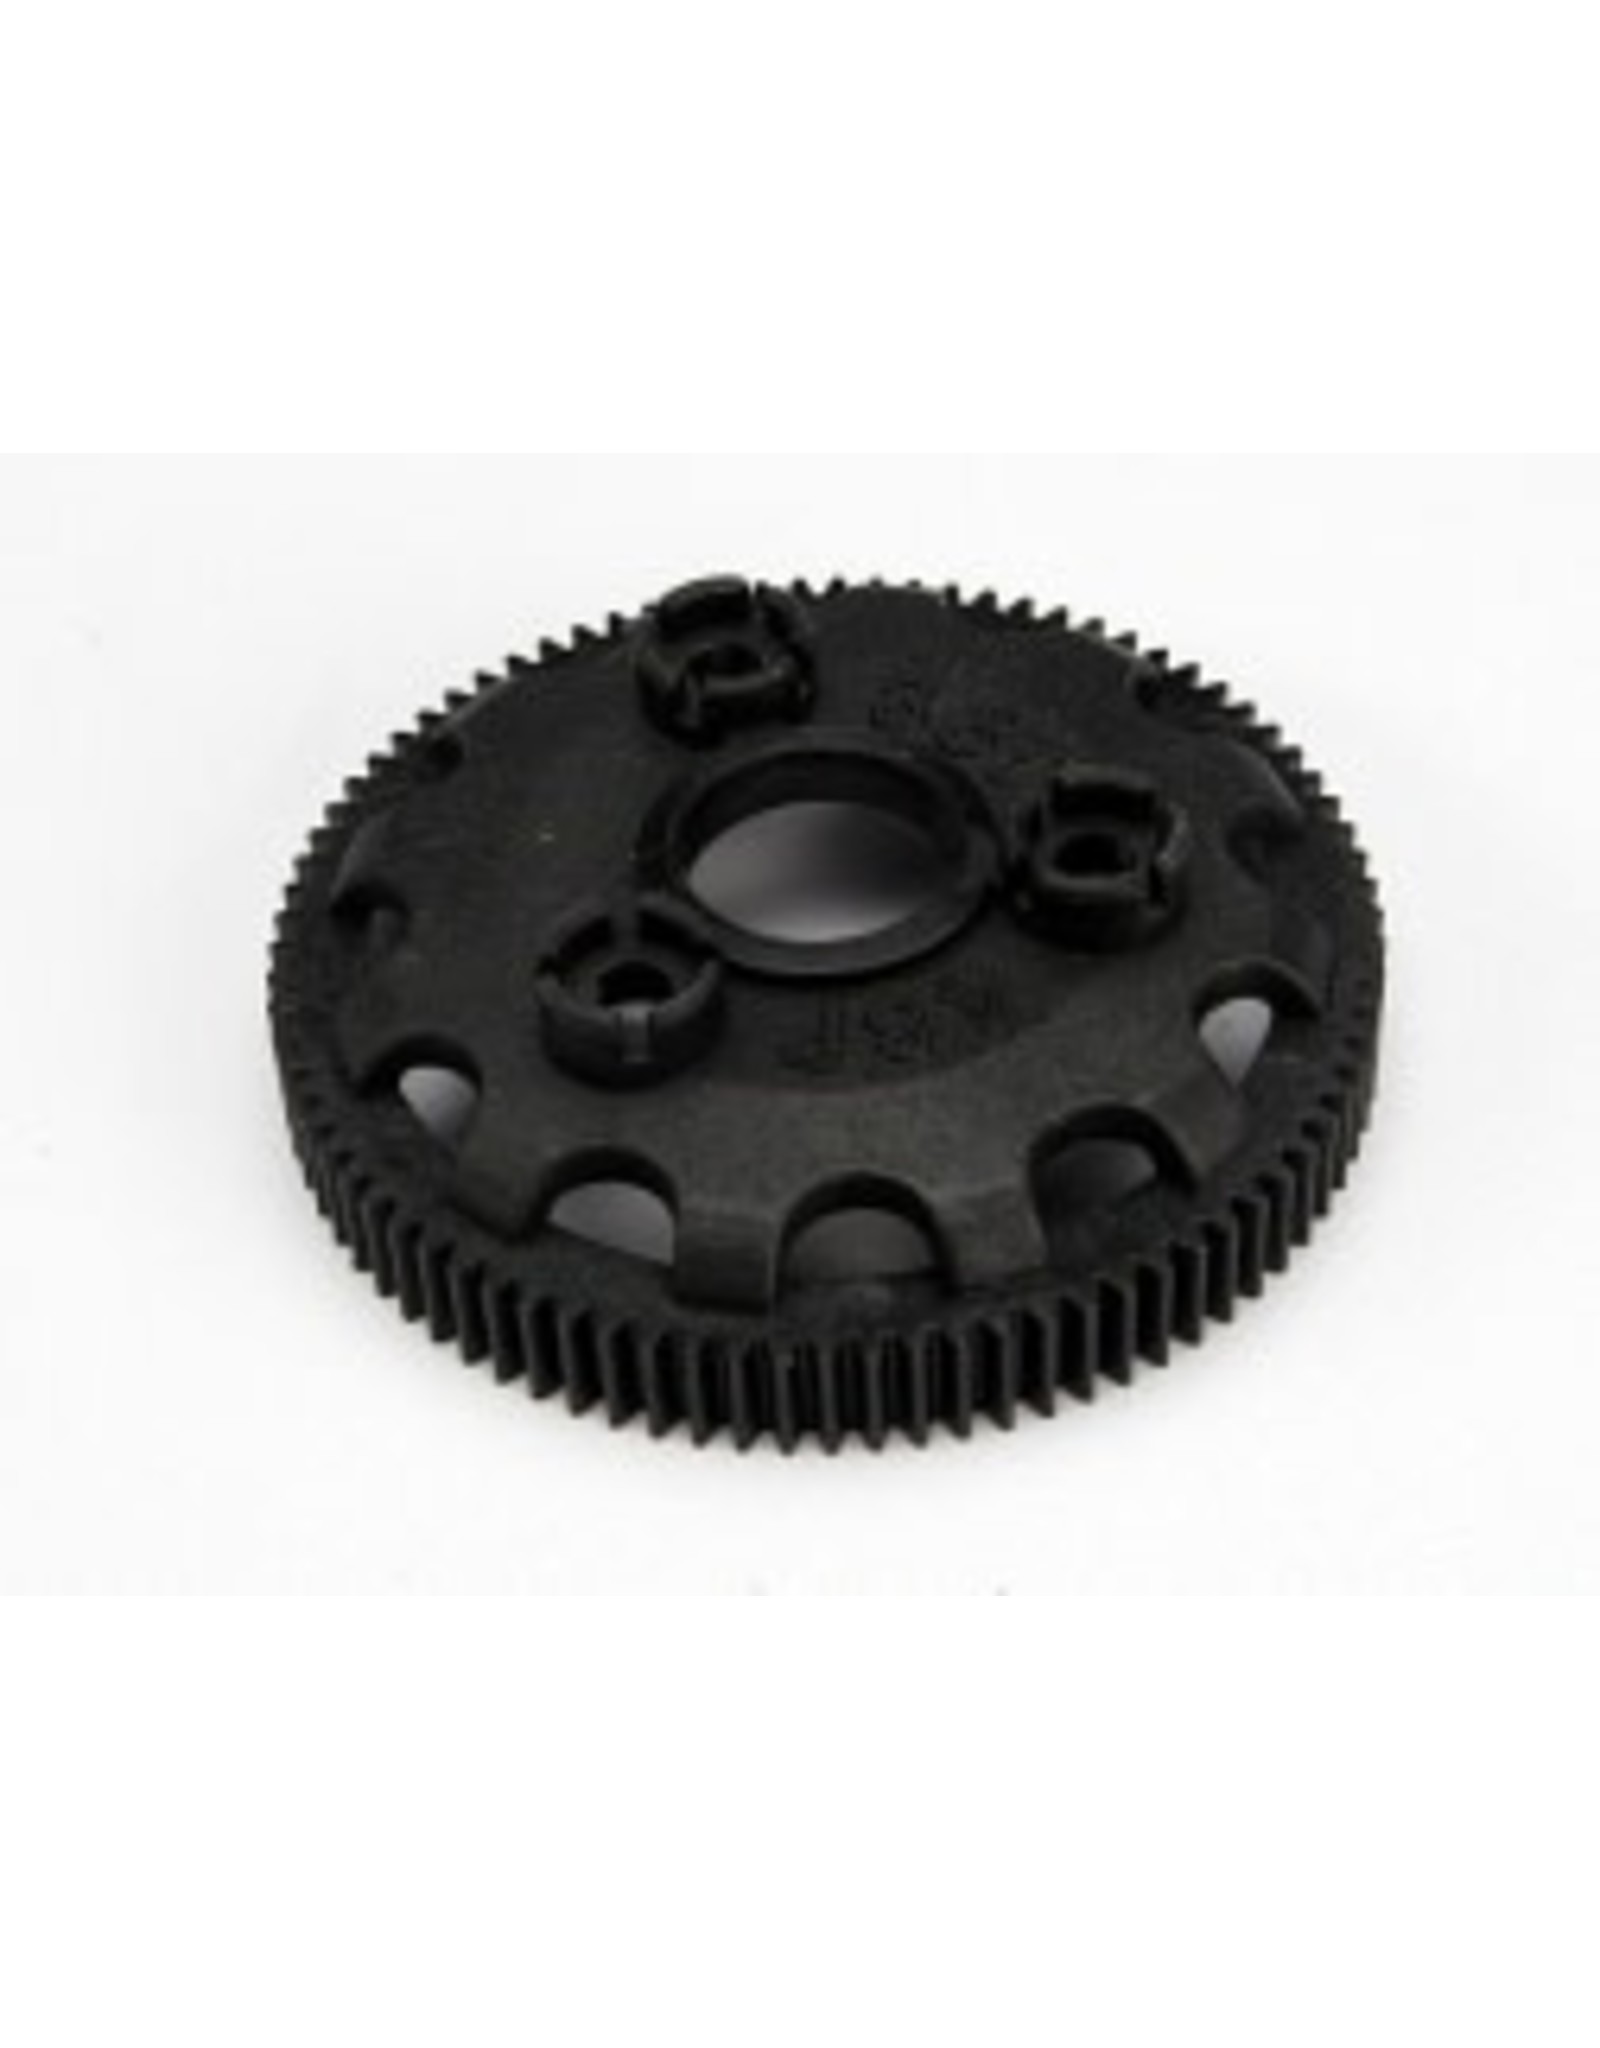 Traxxas 4683 Spur gear, 83-tooth (48-pitch) (for models with Torque-Control slipper clutch)